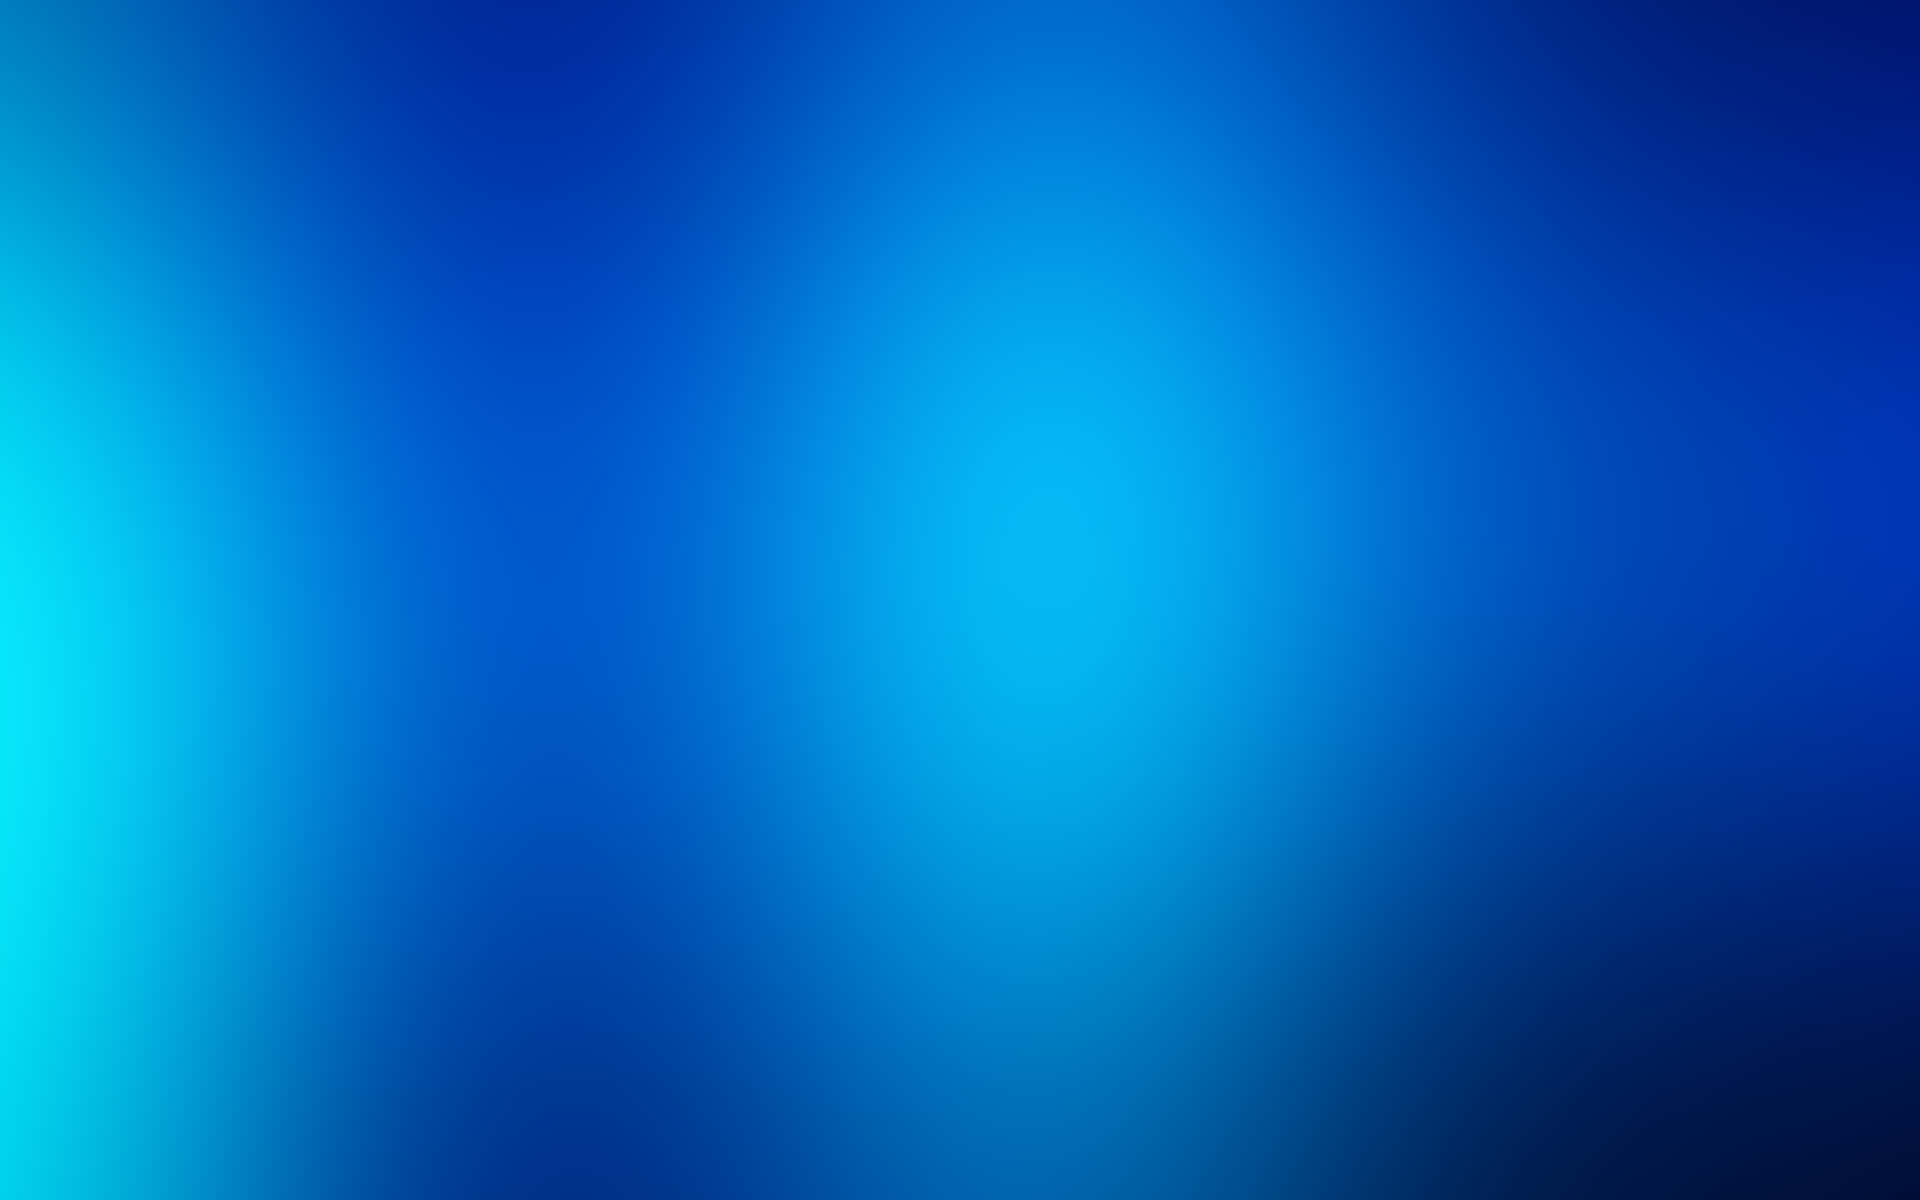 Shades Of Royal Blue Gradient Background